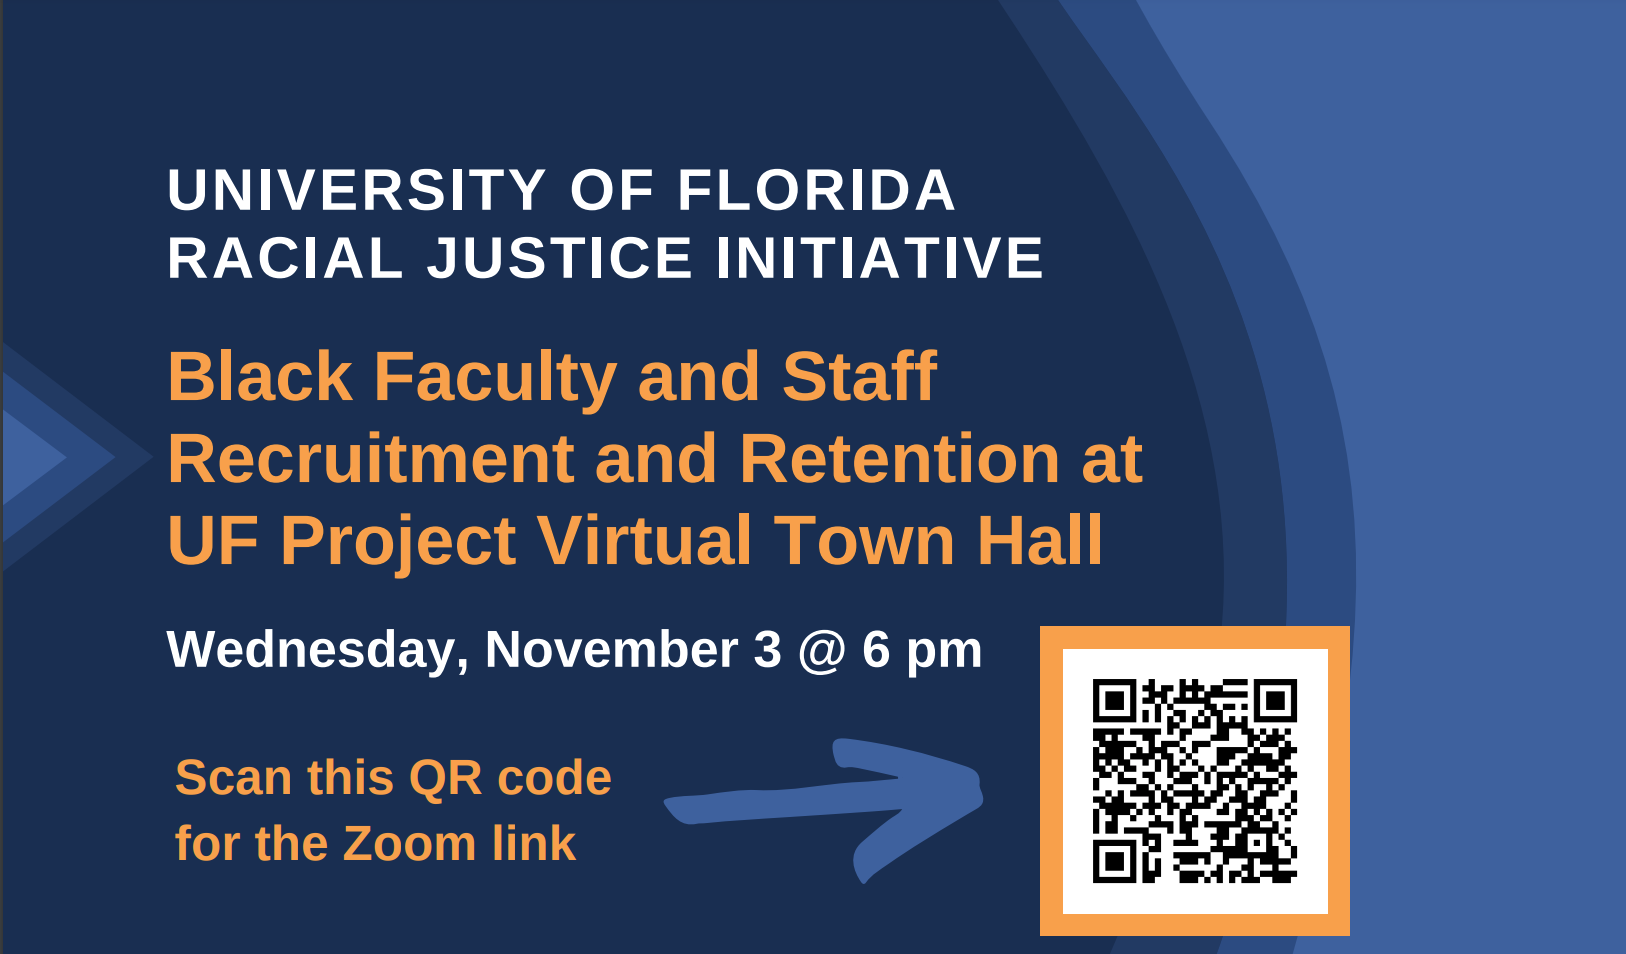 Black Faculty and Staff Recruitment and Retention at UF Project Virtual